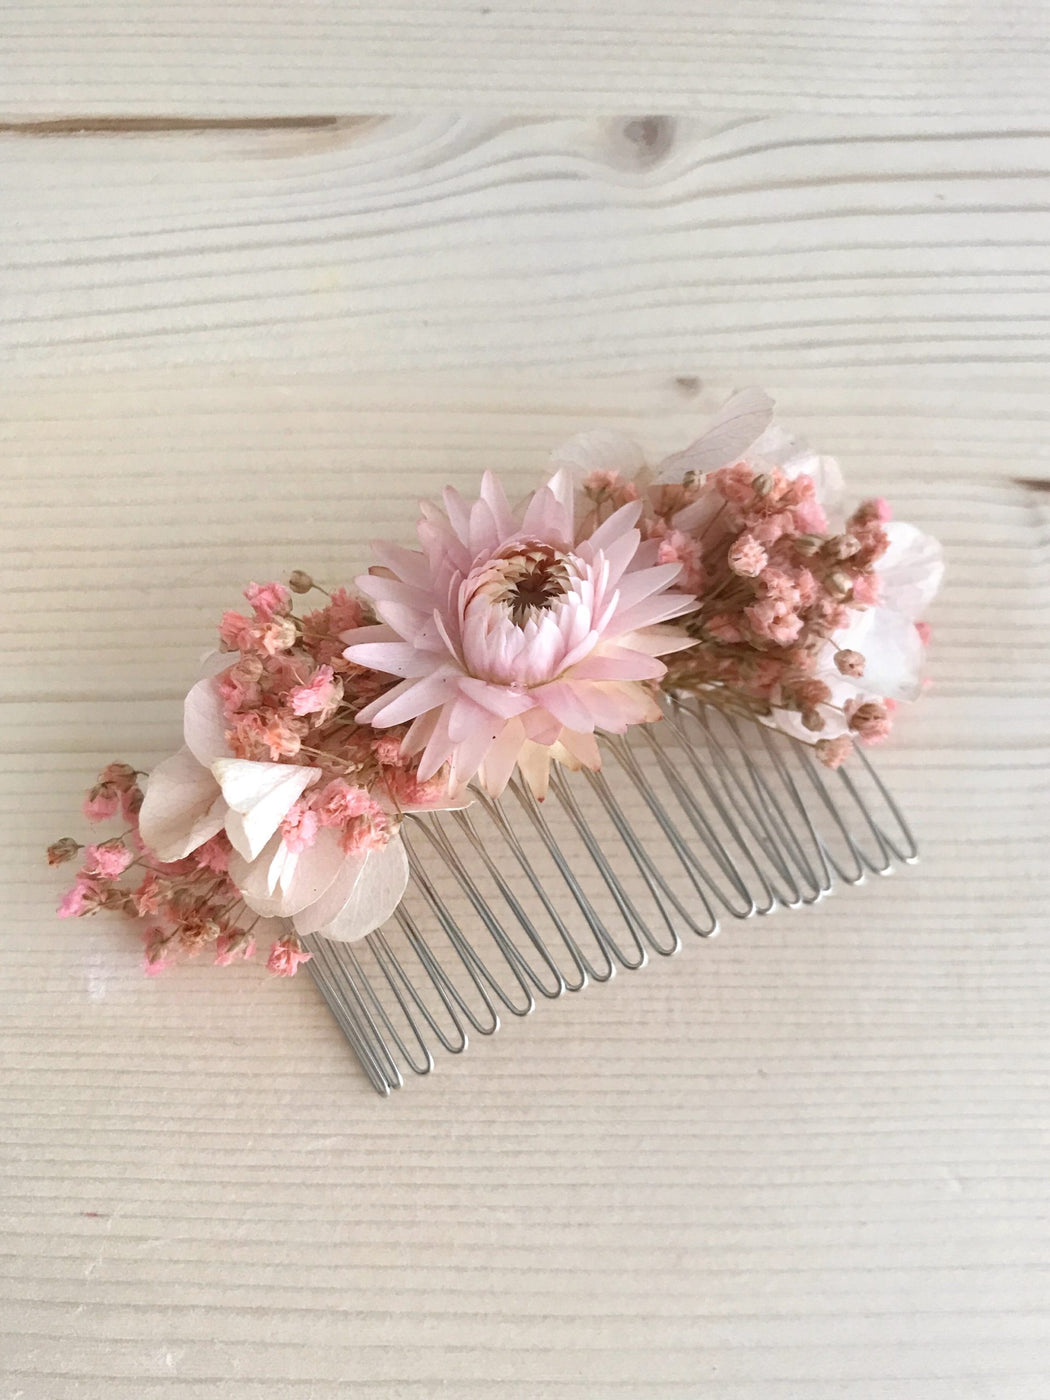 Comb in stabilized flowers 